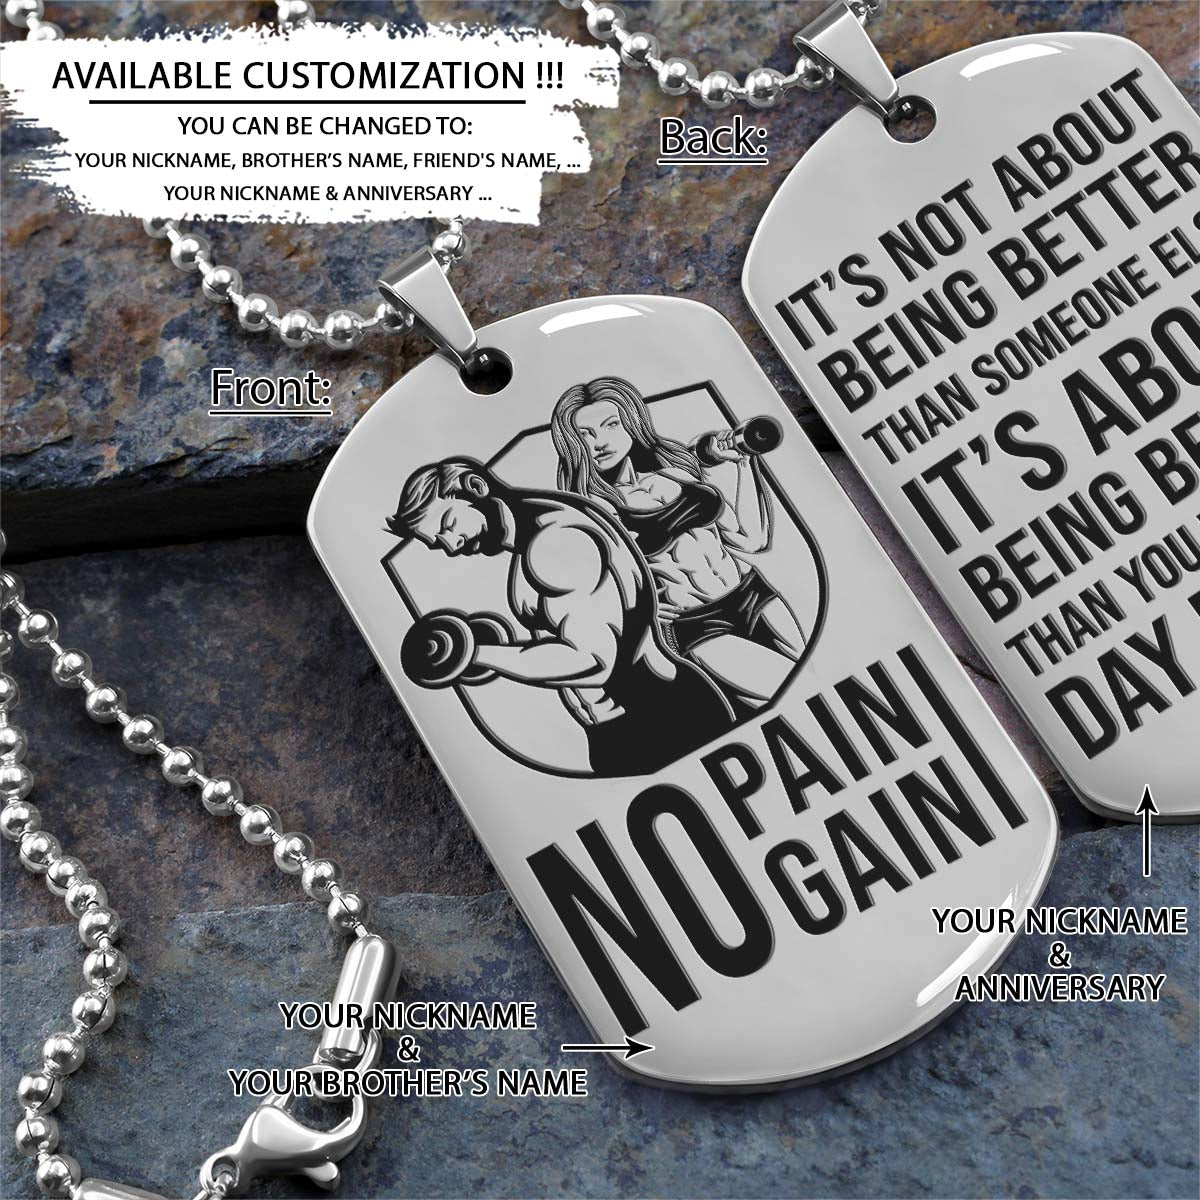 GYMD015 - No Pain - No Gain - It's About Being Better Than You Were The Day Before - Gym - Fitness Center - Workout - Gym Dog Tag - Gym Necklace - Silver Engrave Dog Tag